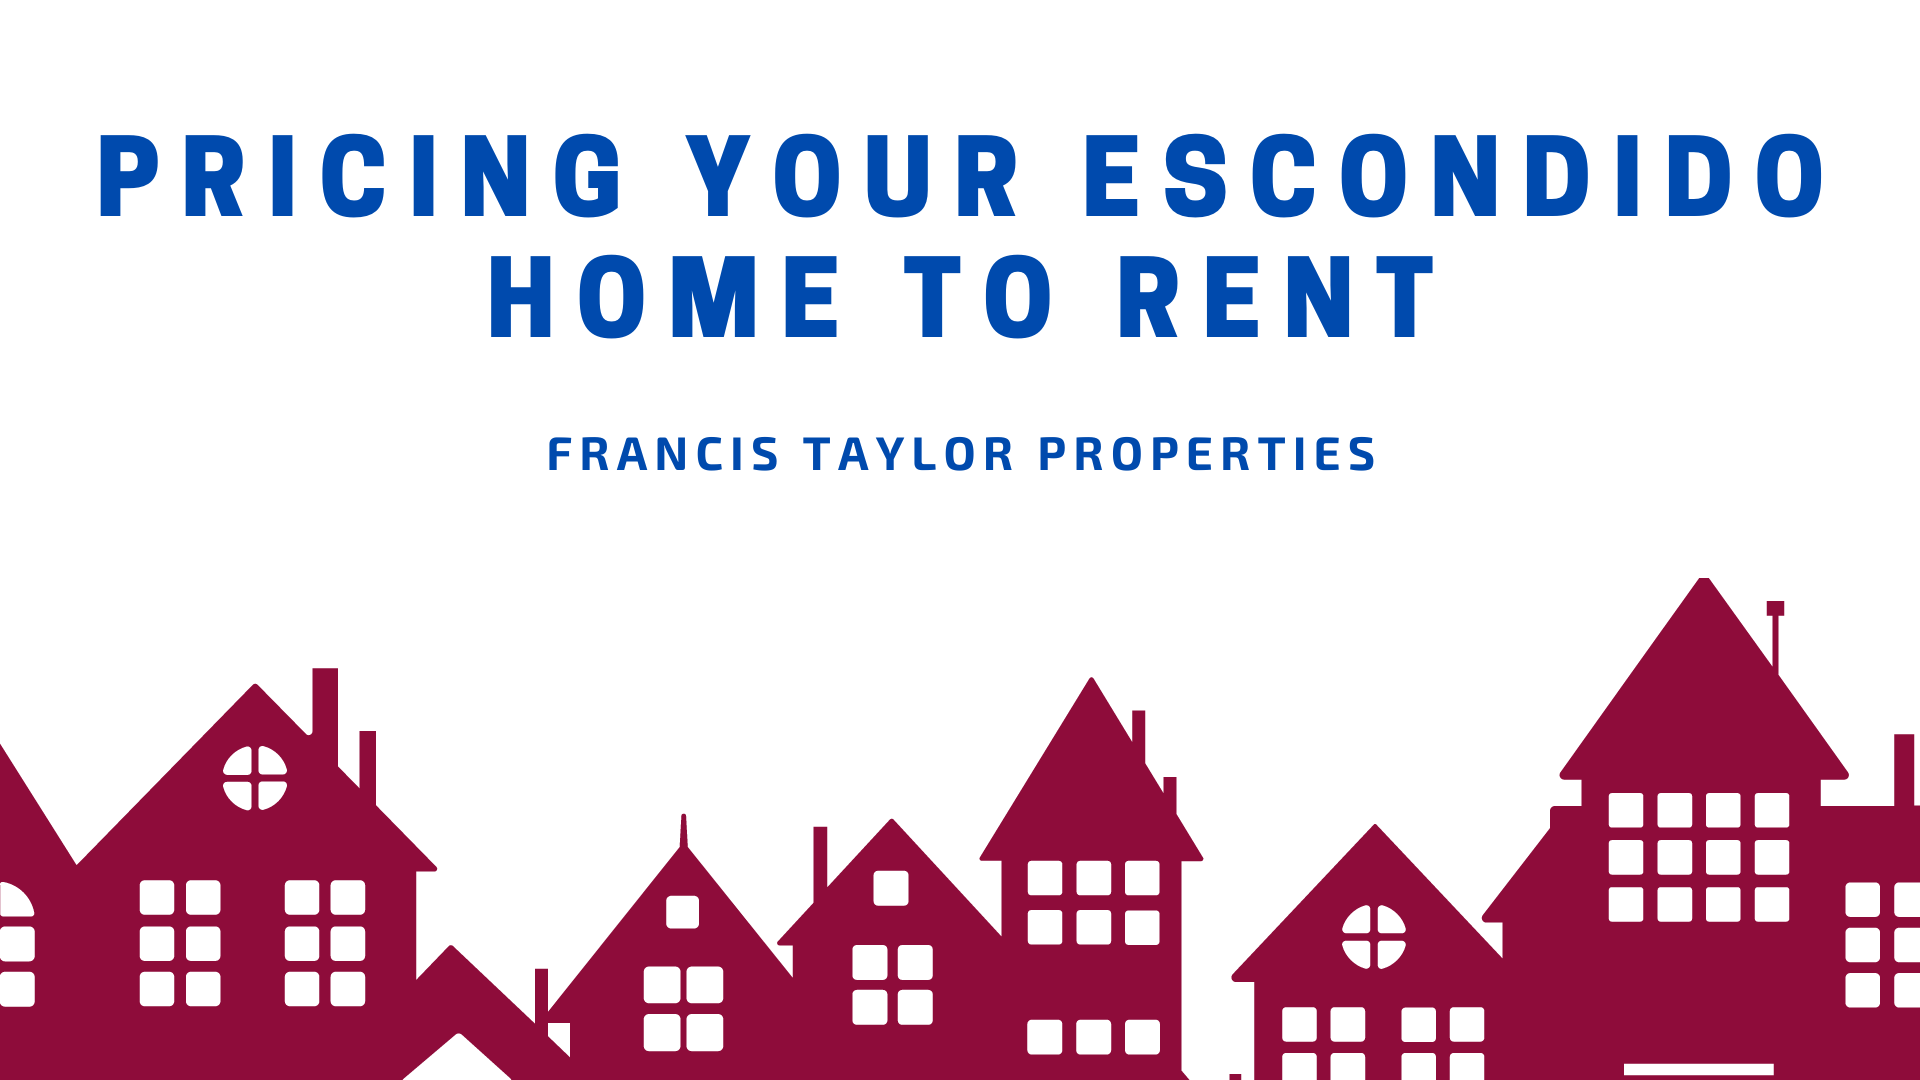 Pricing Your Escondido Home to Rent